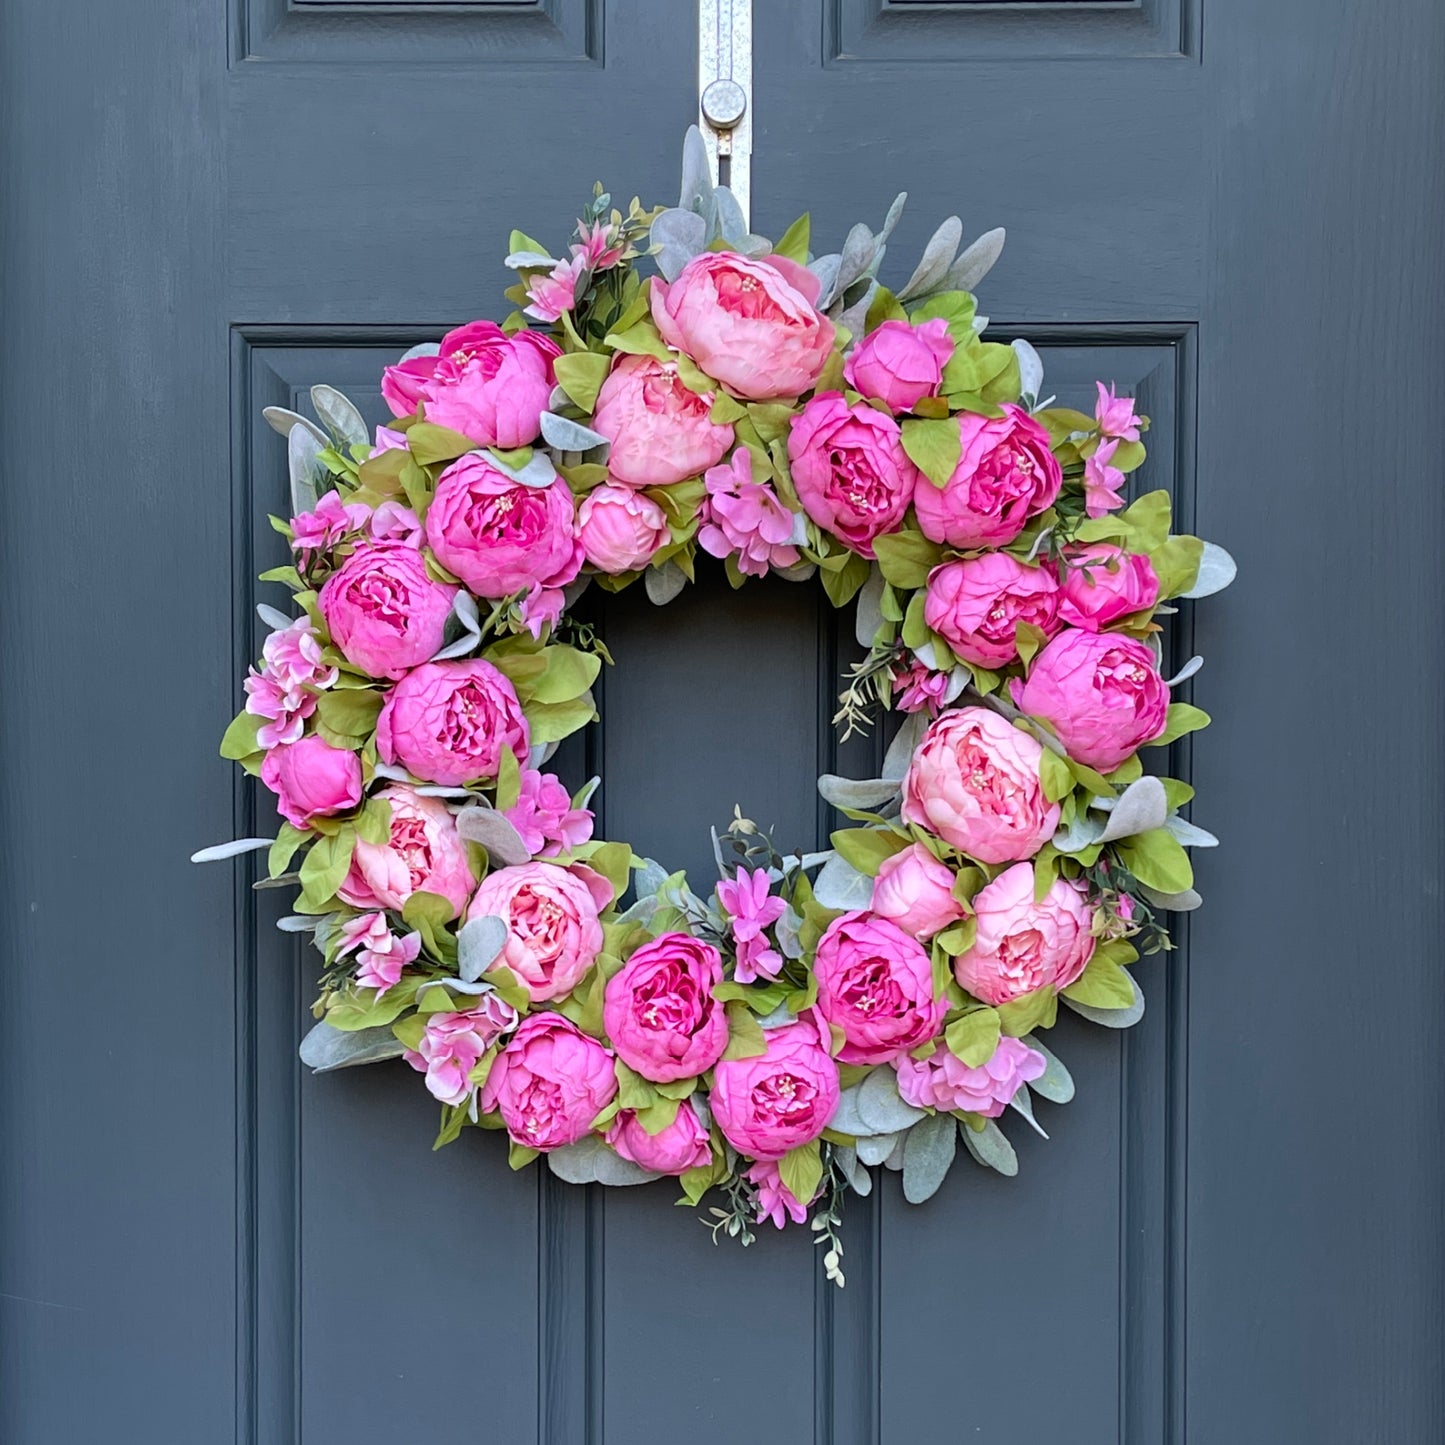 24" wreath has been handcrafted on a grapevine base and is trimmed with peonies in two shades of pink peonies (pale pink & bright pink), hydrangeas, and other floral accents on a bed of flocked lambs ear.